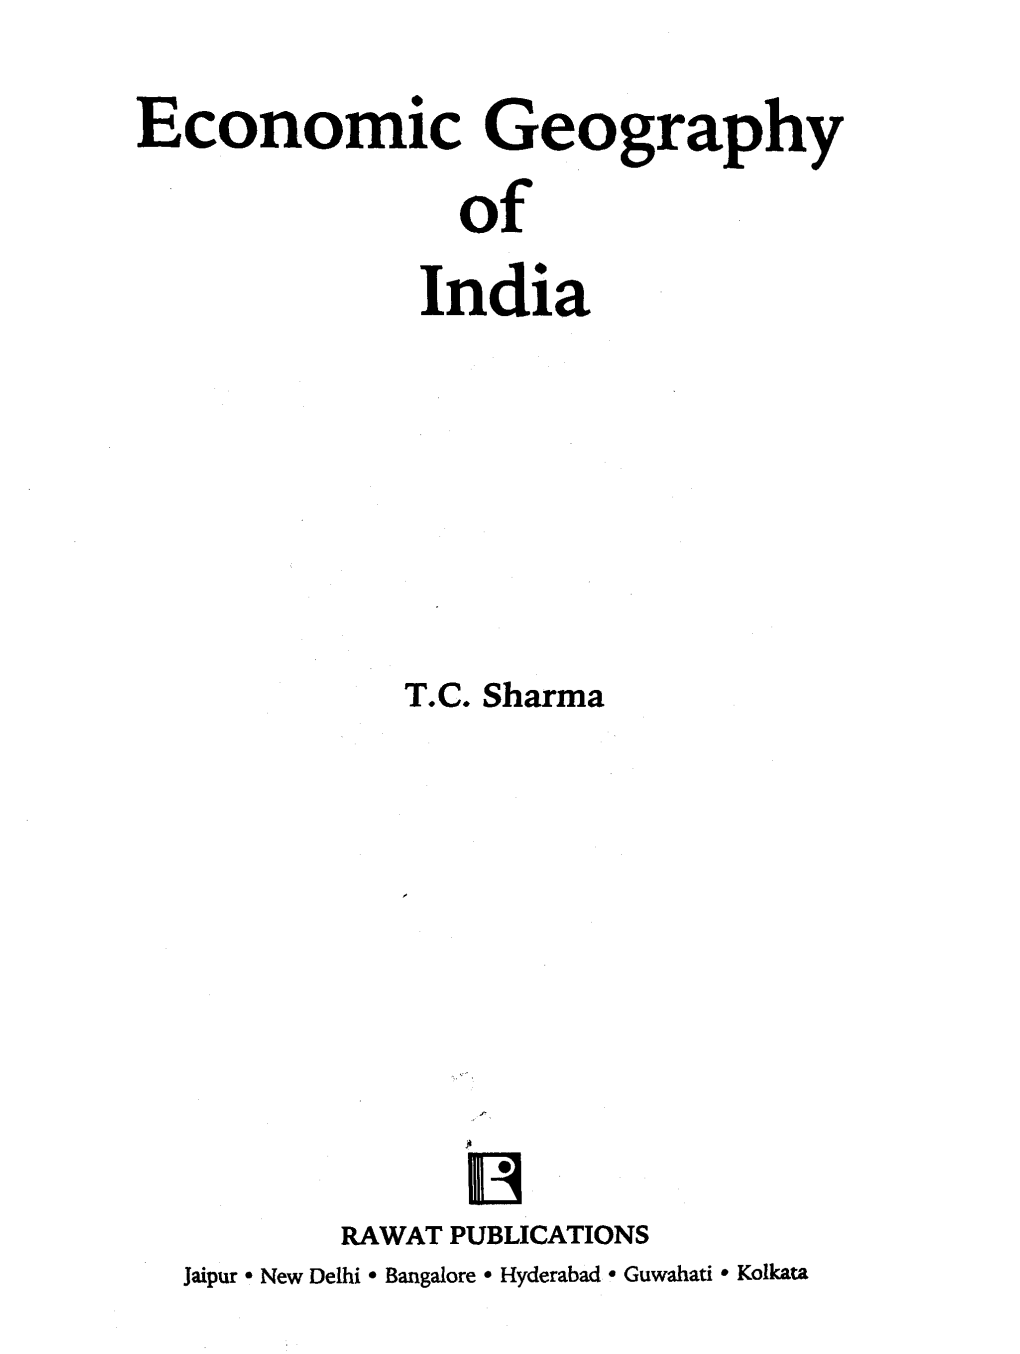 Economic Geography of India T.C. Sharma H RAWAT PUBLICATIONS